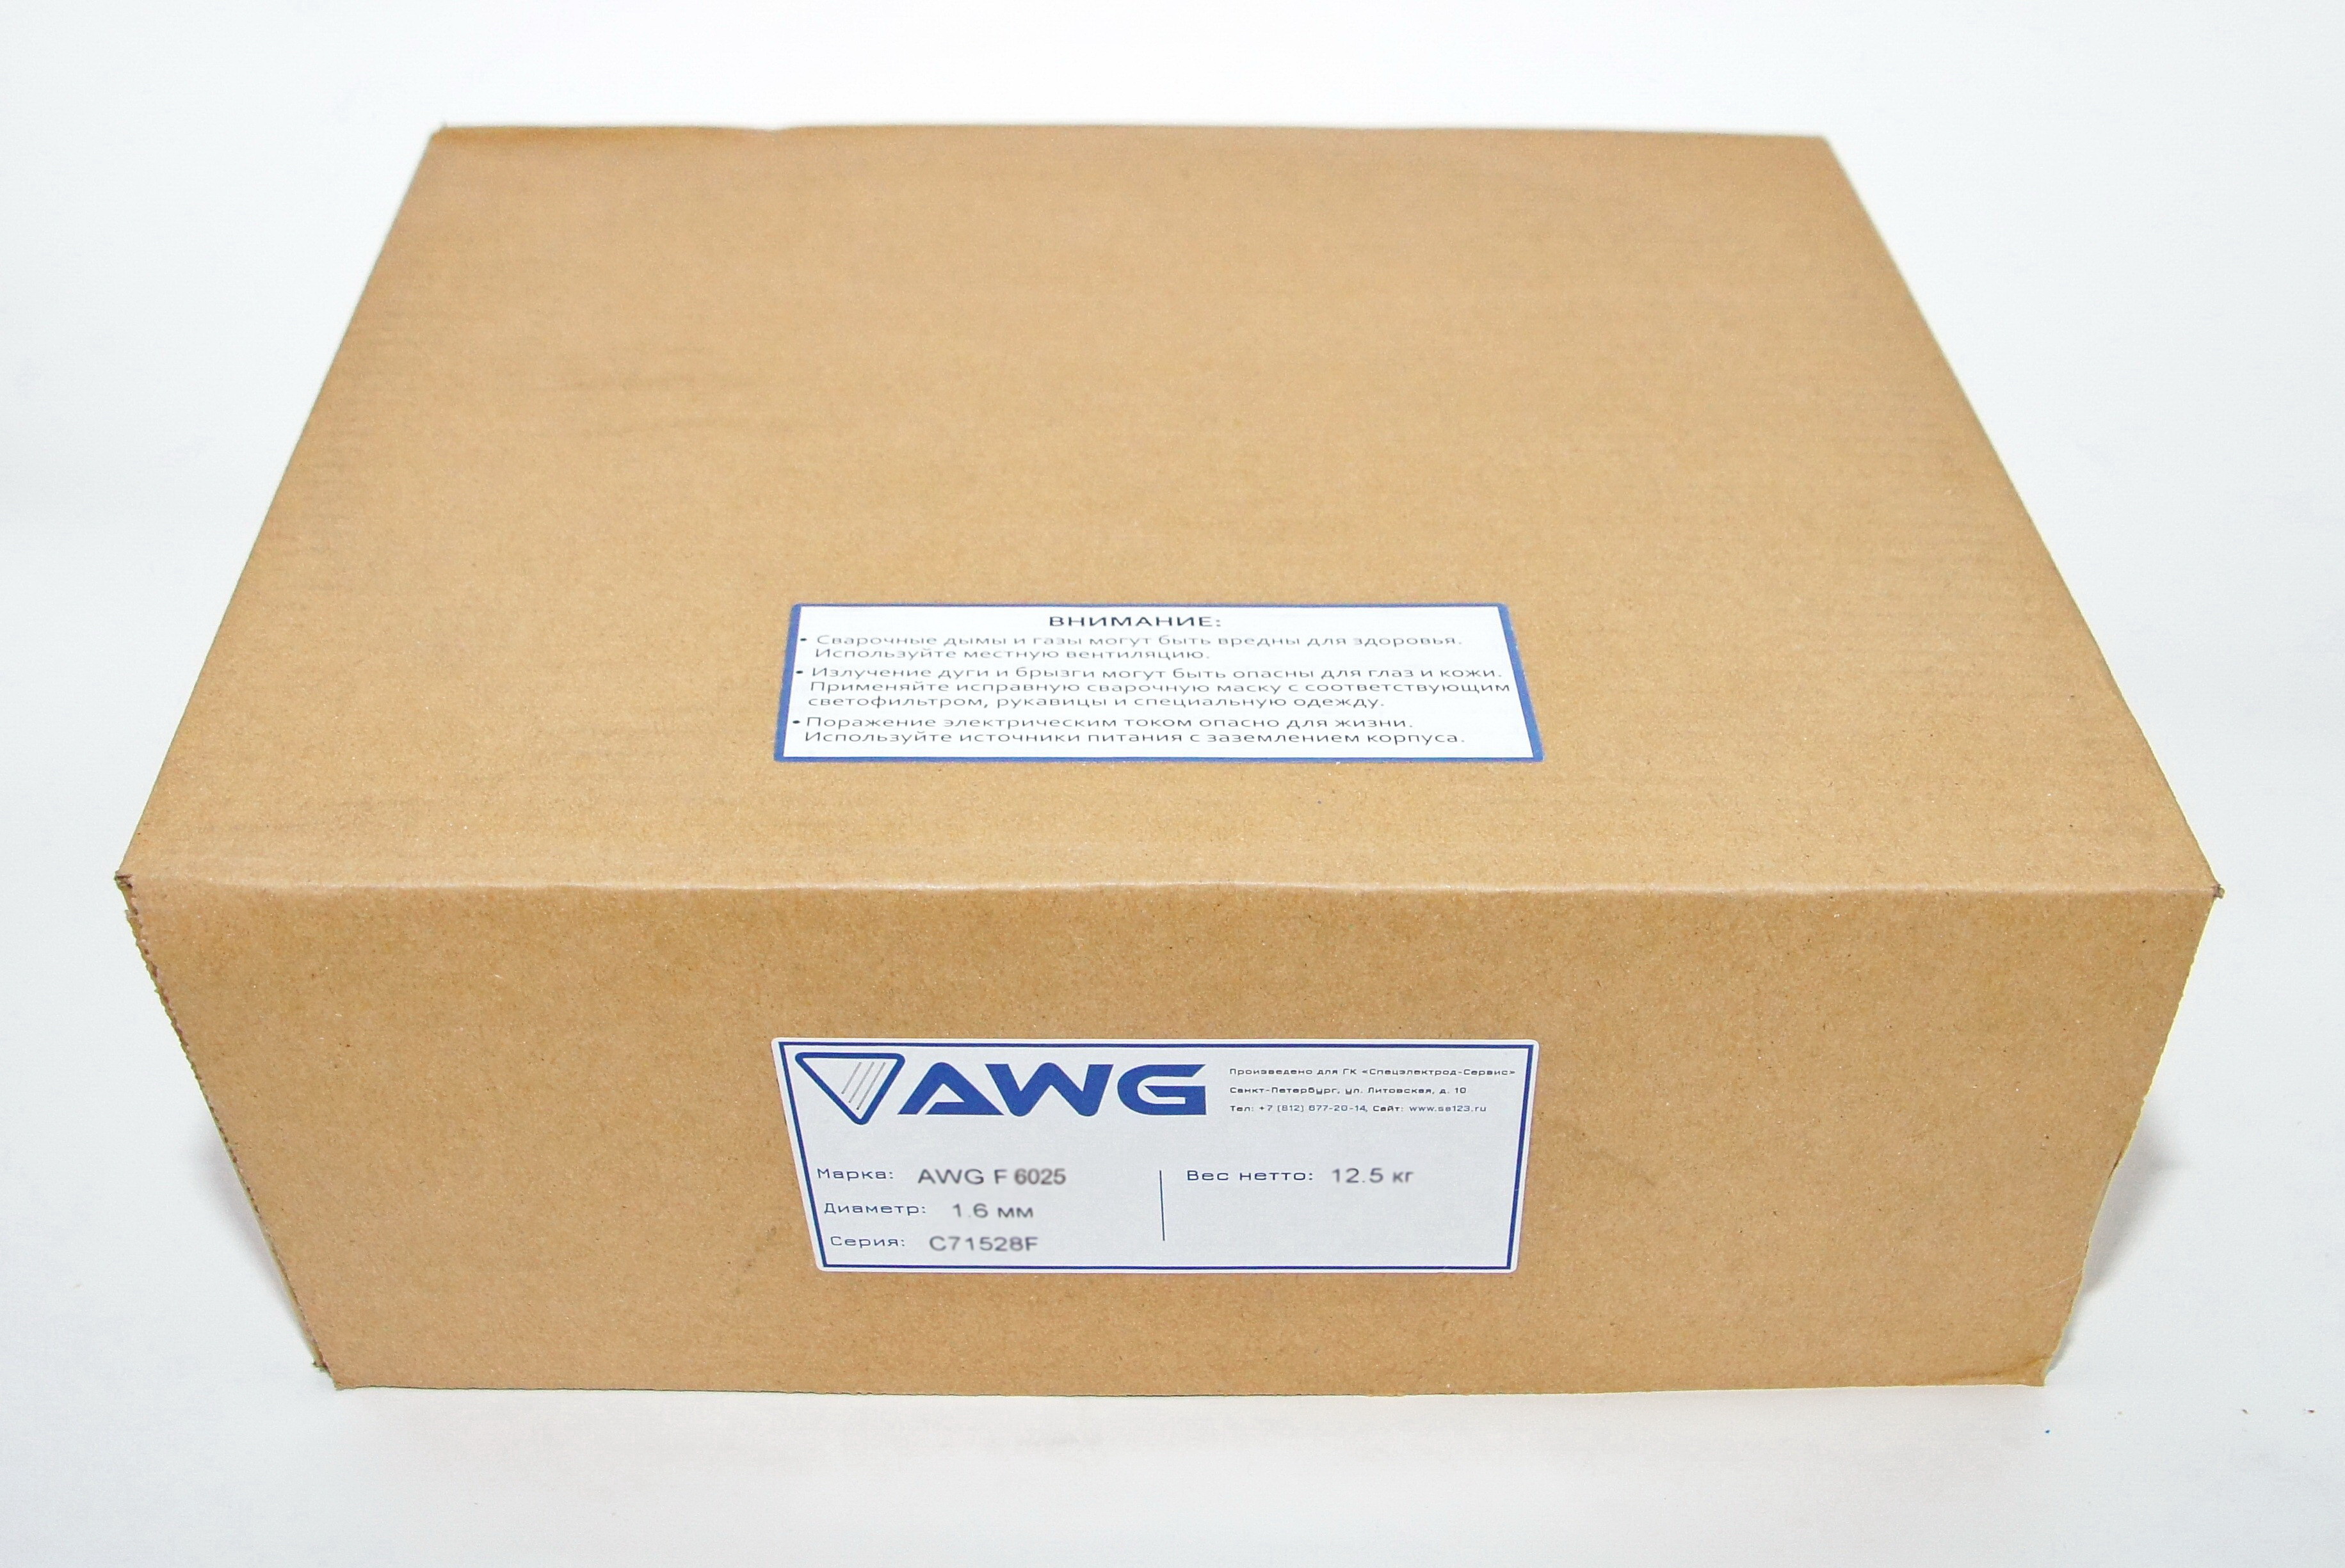 awg-f-6025